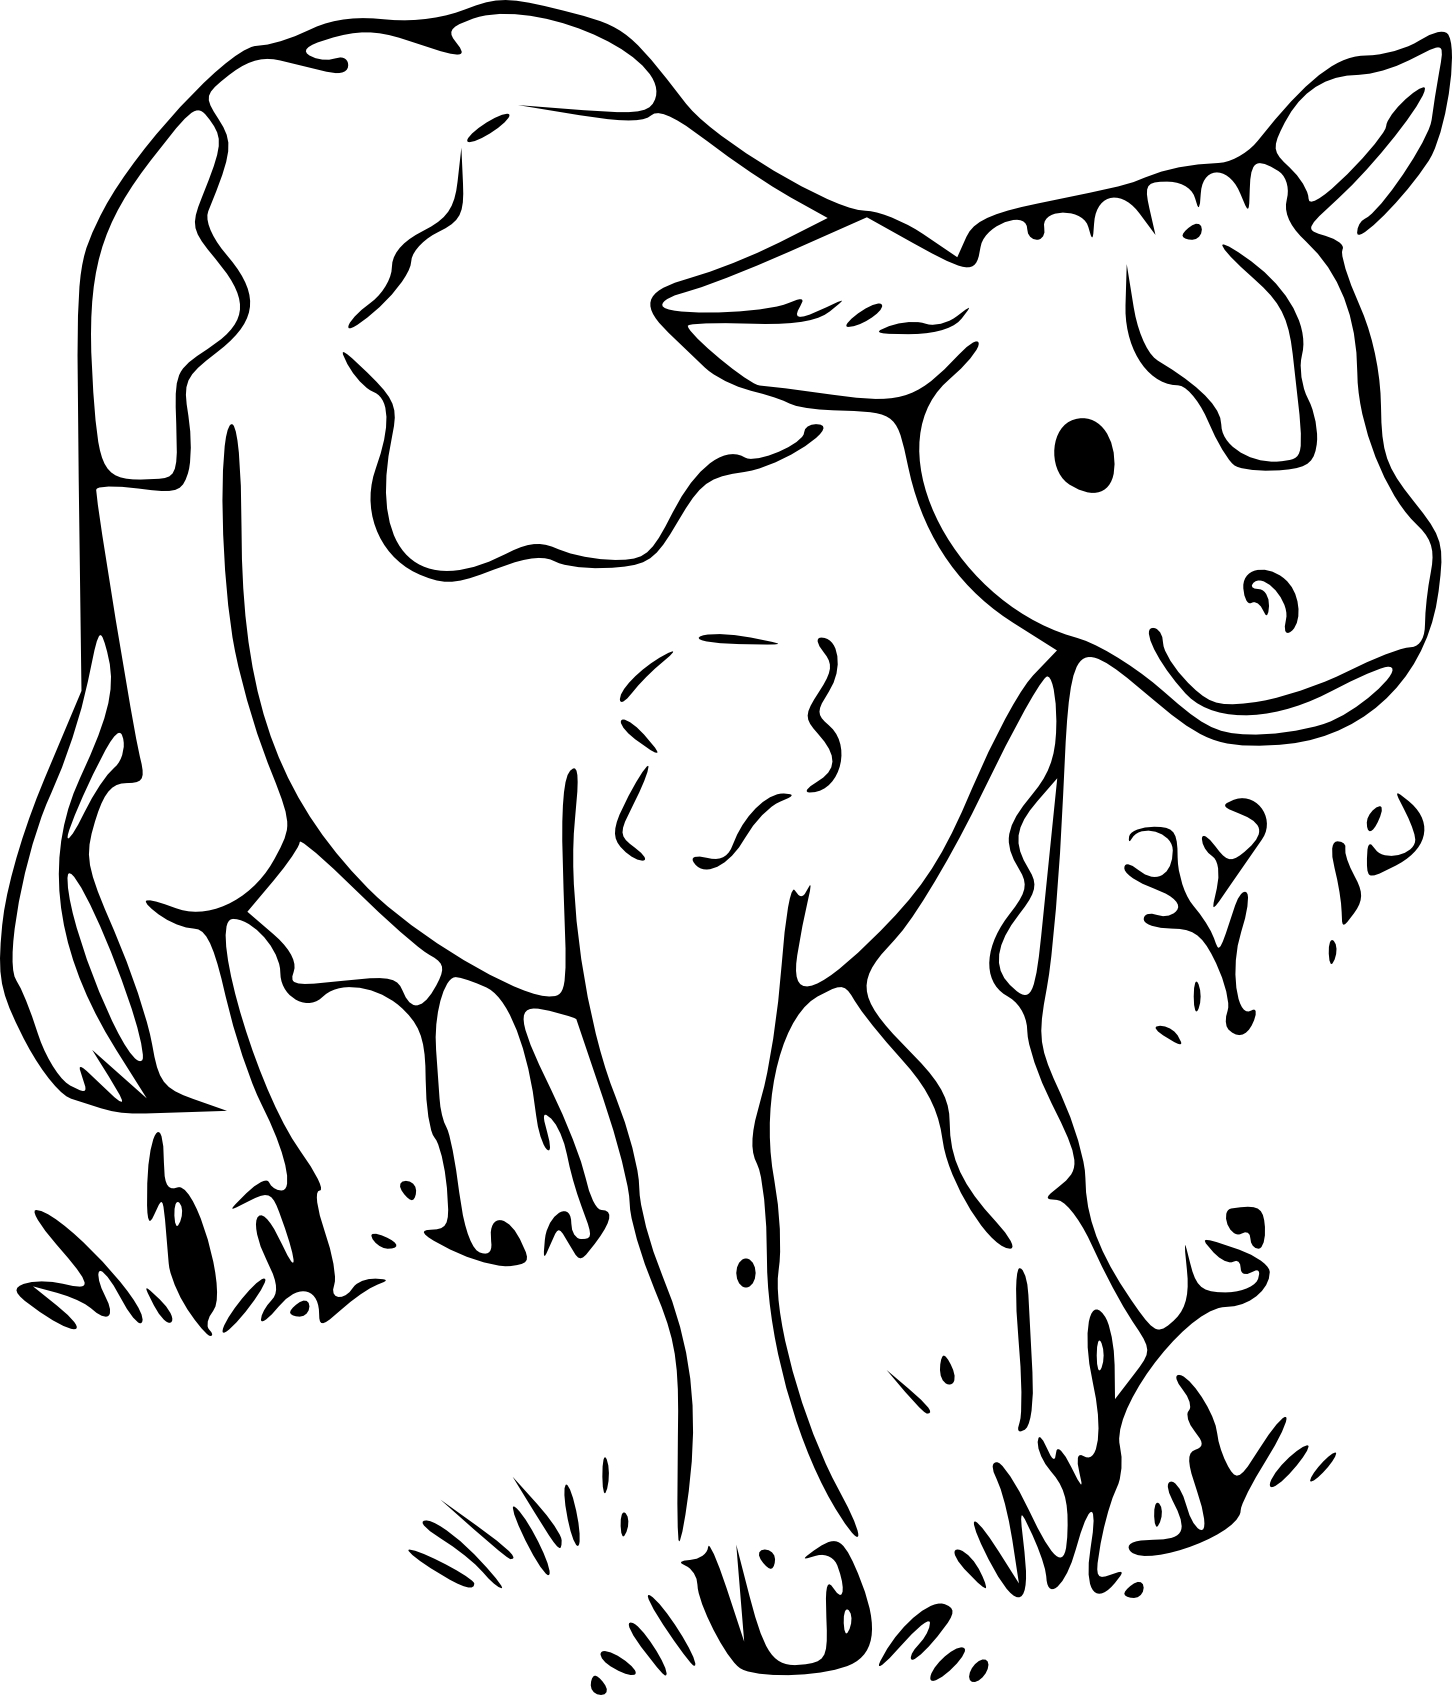 Free Veal coloring page